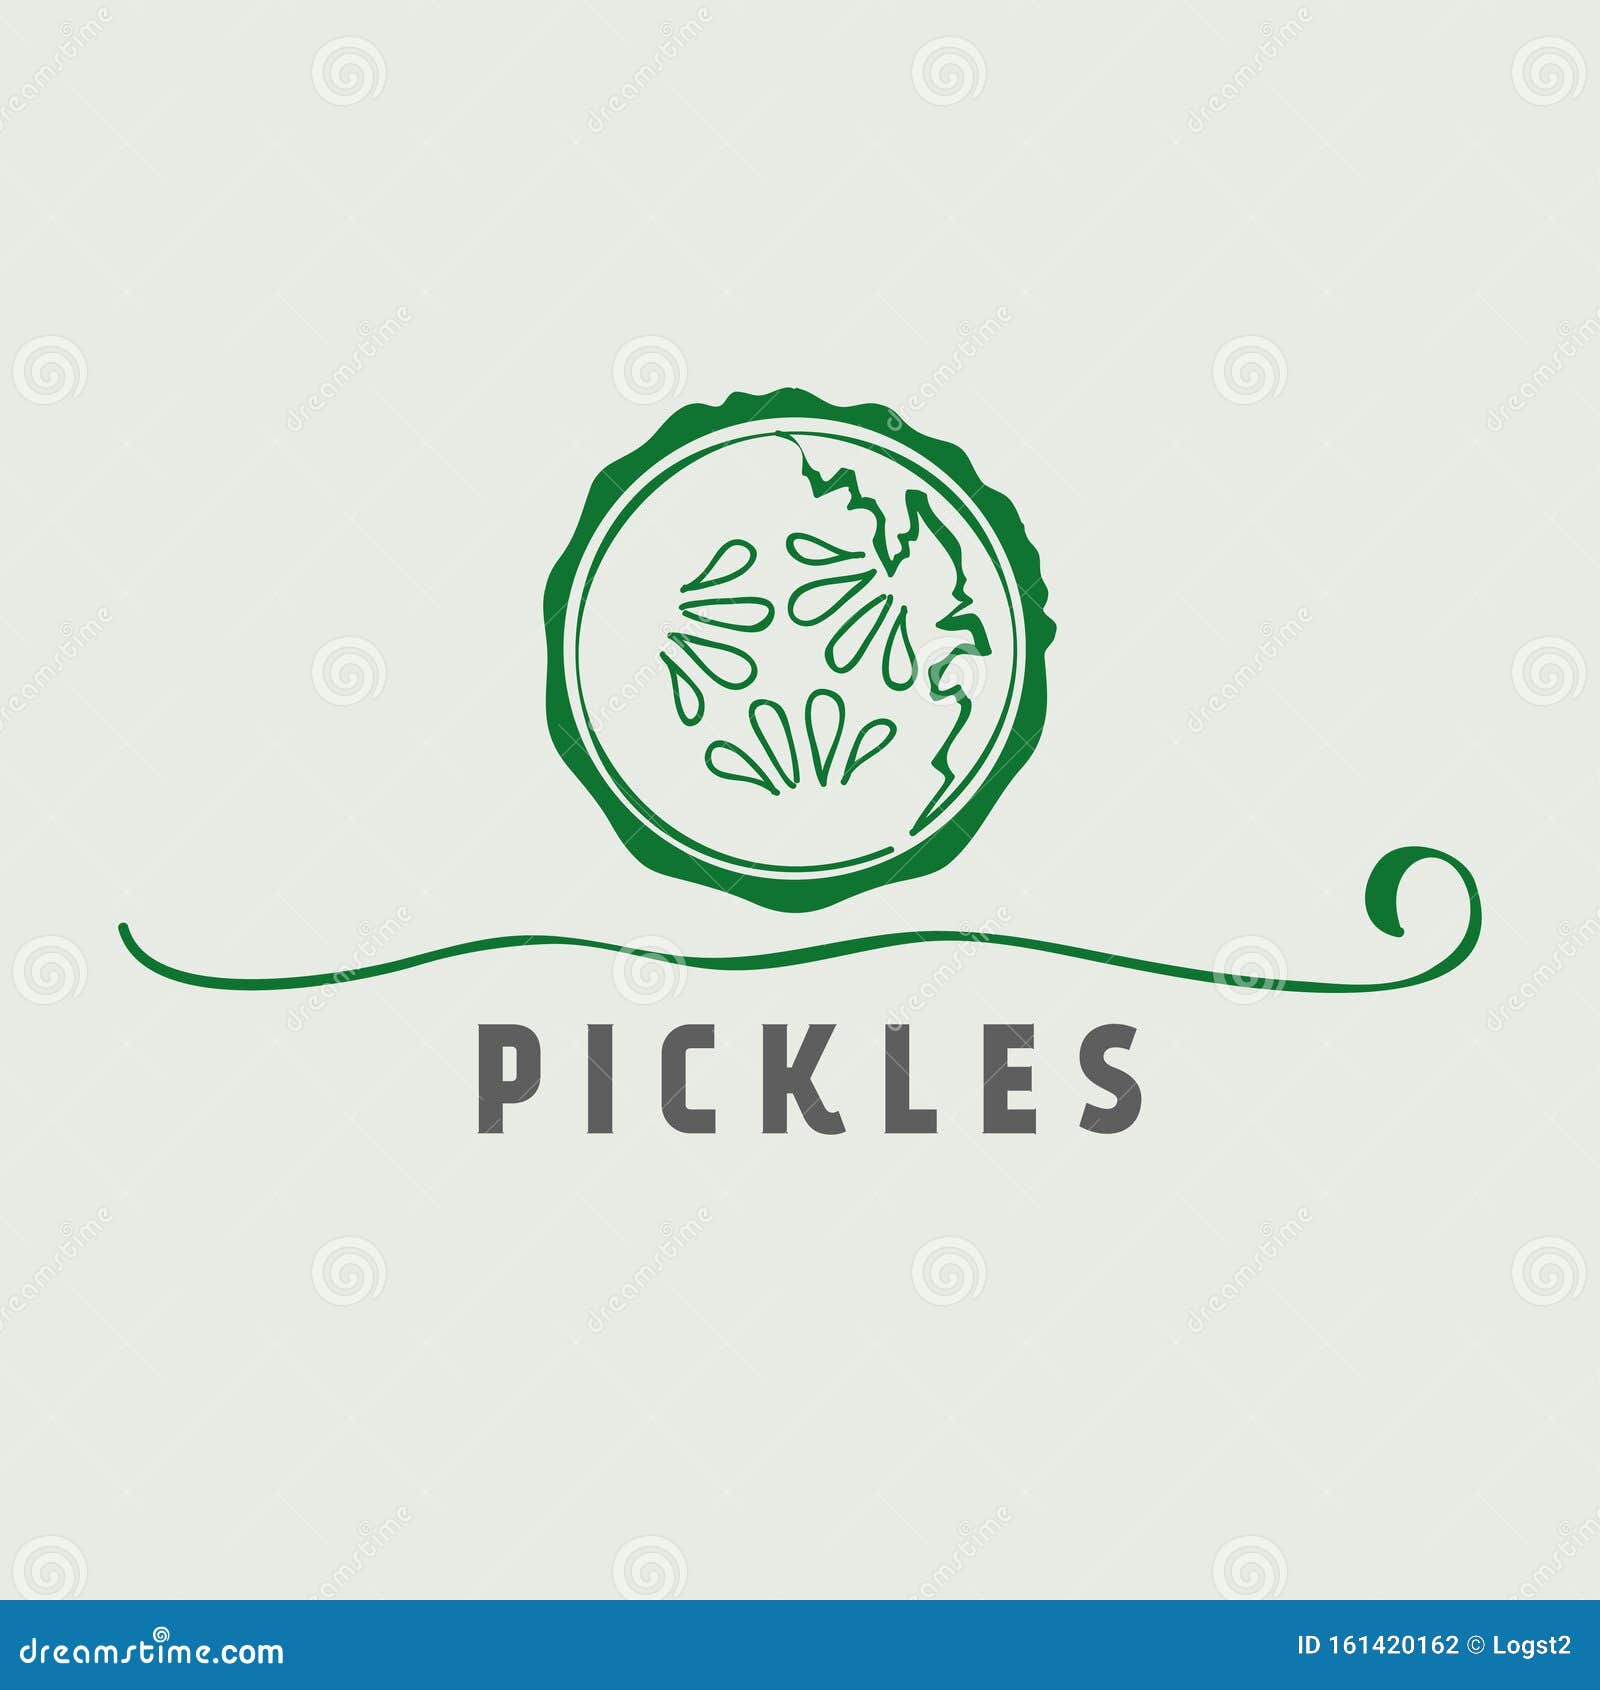 PVR Veg & Non-Veg Pickles - PVR PICKLES LOGO IS HERE..! 🤩 Our Speciality :  Only Halal, No Preservatives, No Colours. 200% Pure, Natural & Hygiene. For  orders DM @pvrpickles or Whatsapp